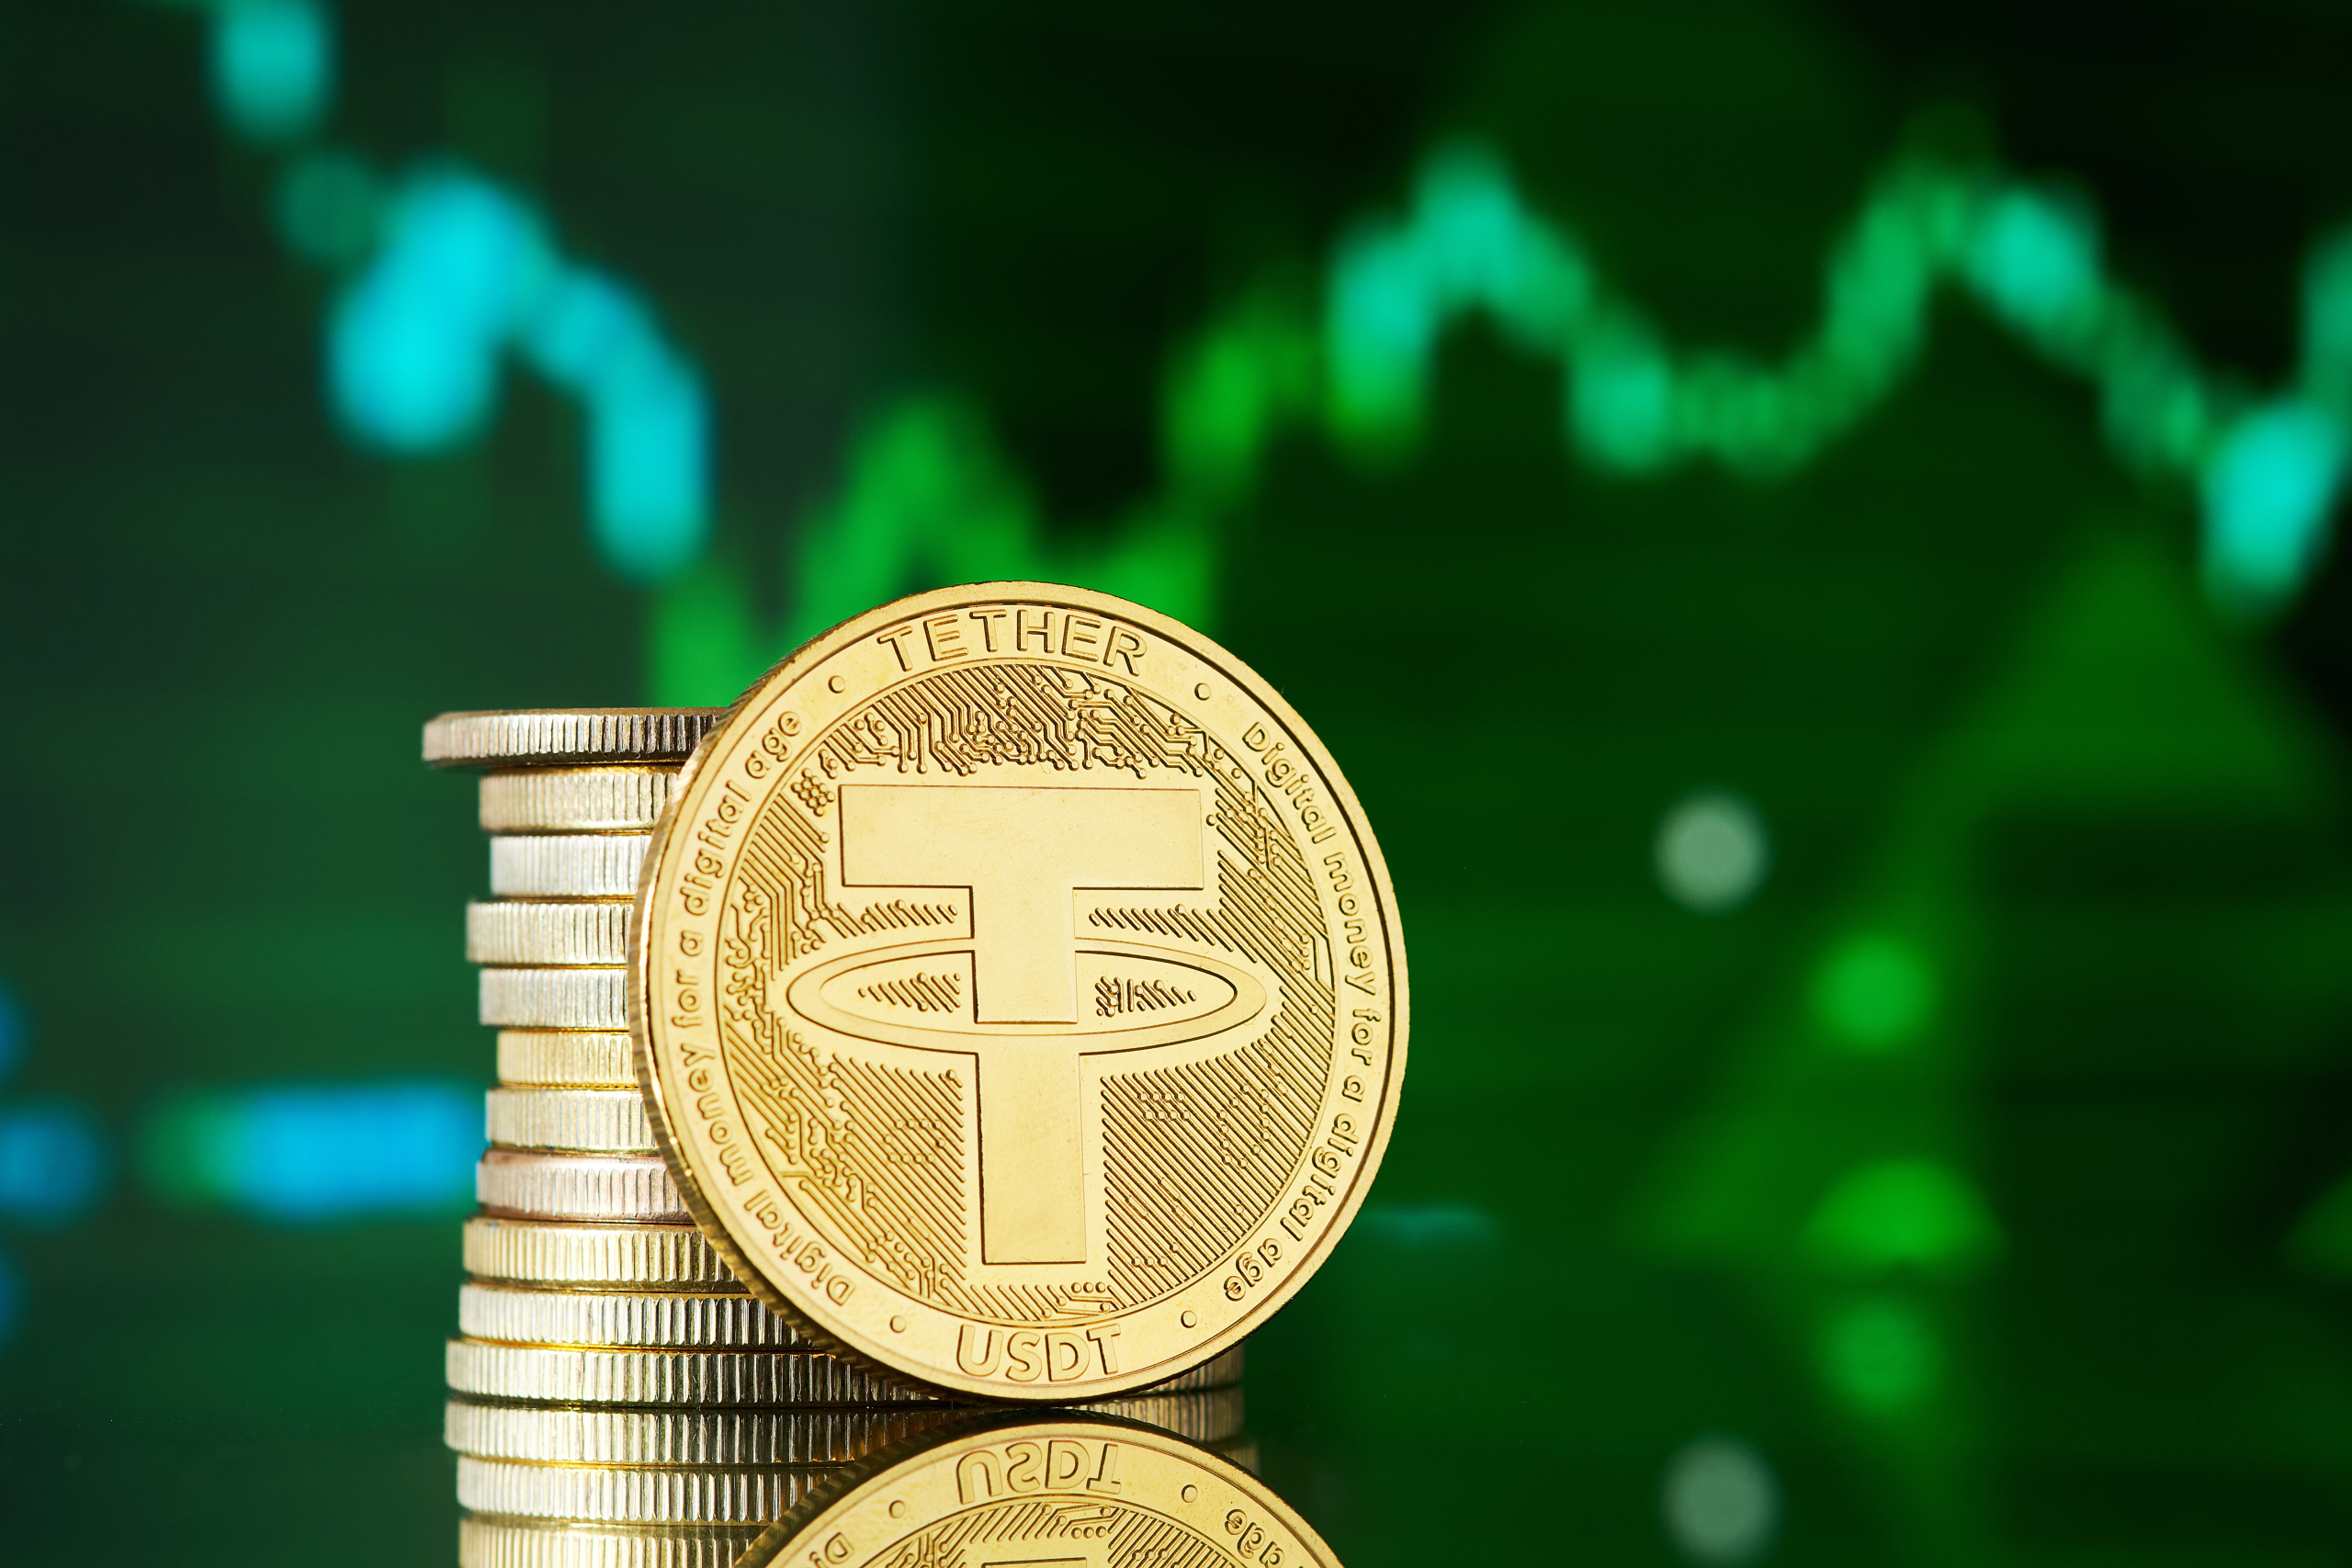 Tether has $1.7 billion in additional reserves
